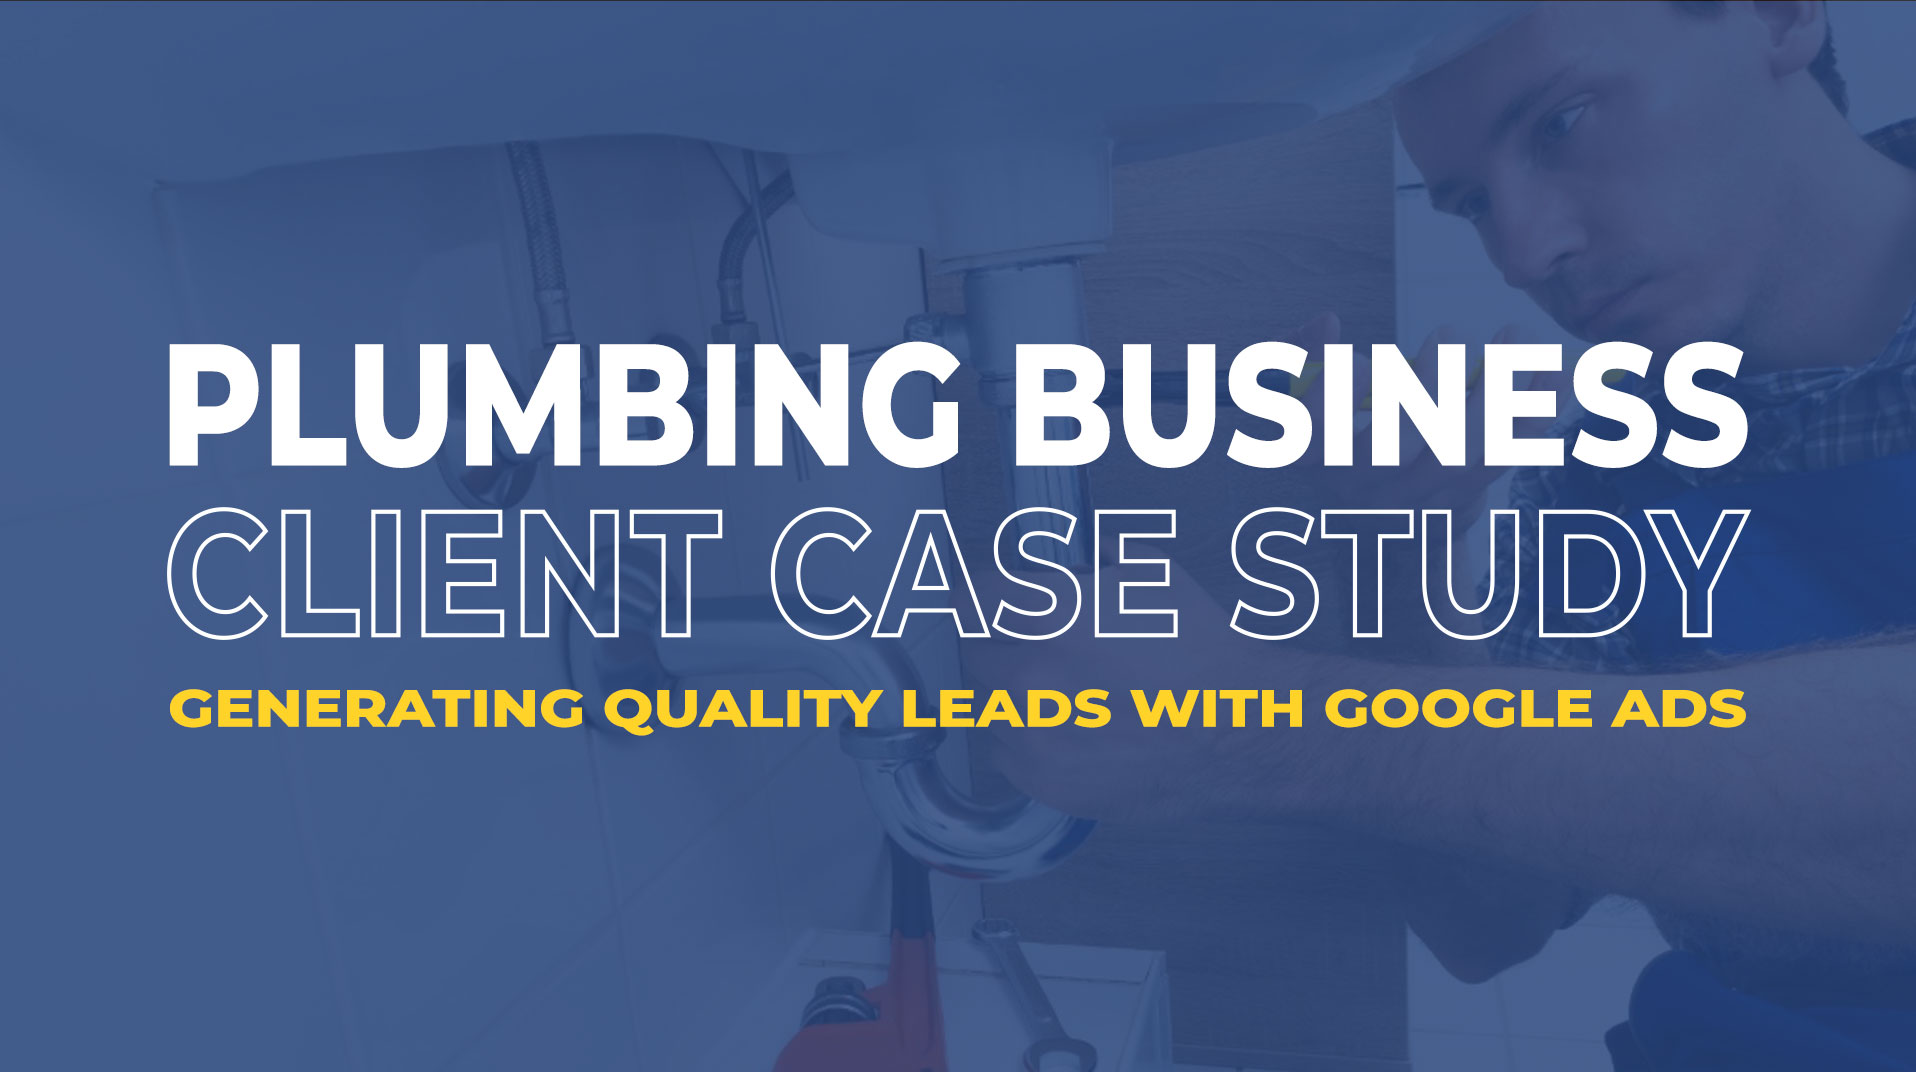 Plumbing Case Study: Google Ads for Quality Leads